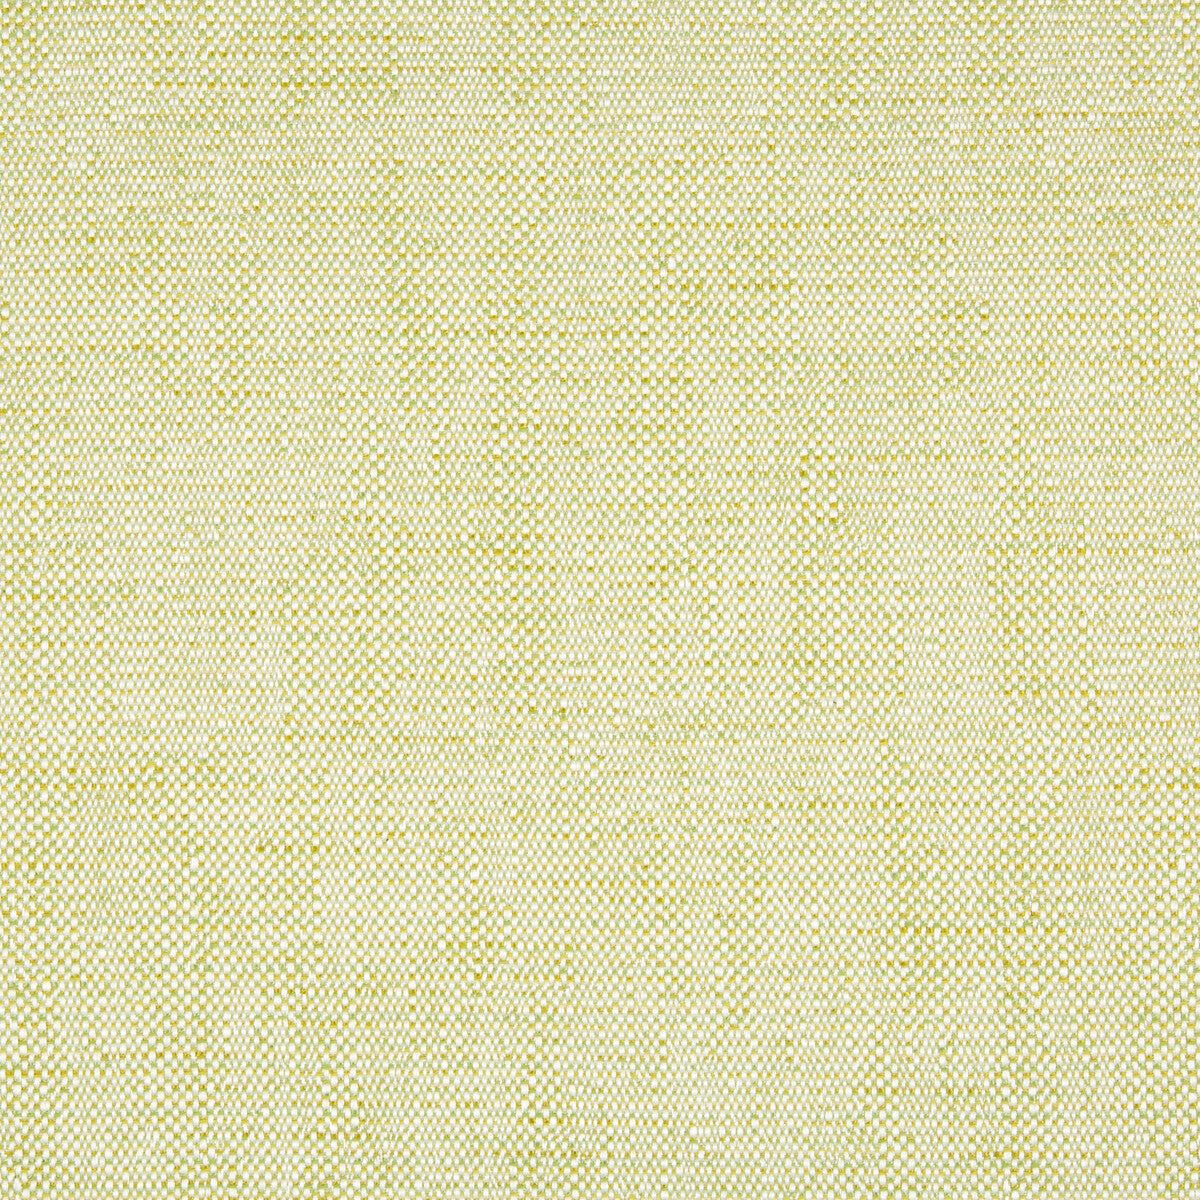 Kravet Contract fabric in 34768-23 color - pattern 34768.23.0 - by Kravet Contract in the Gis collection